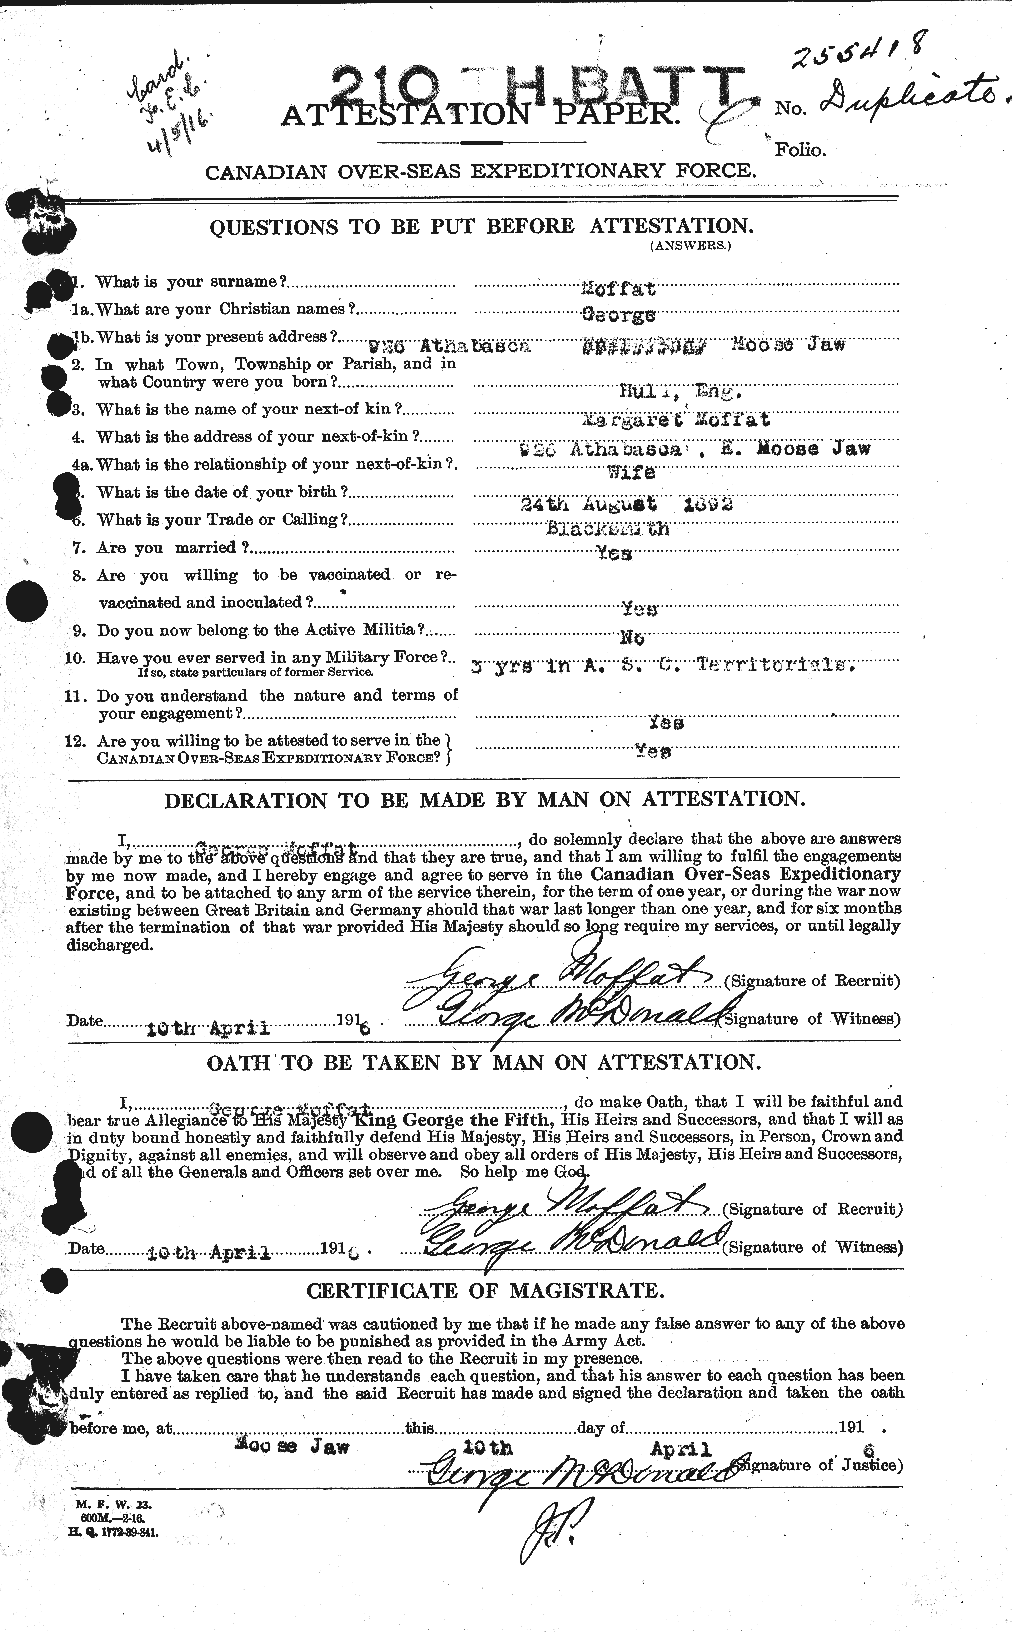 Personnel Records of the First World War - CEF 499015a